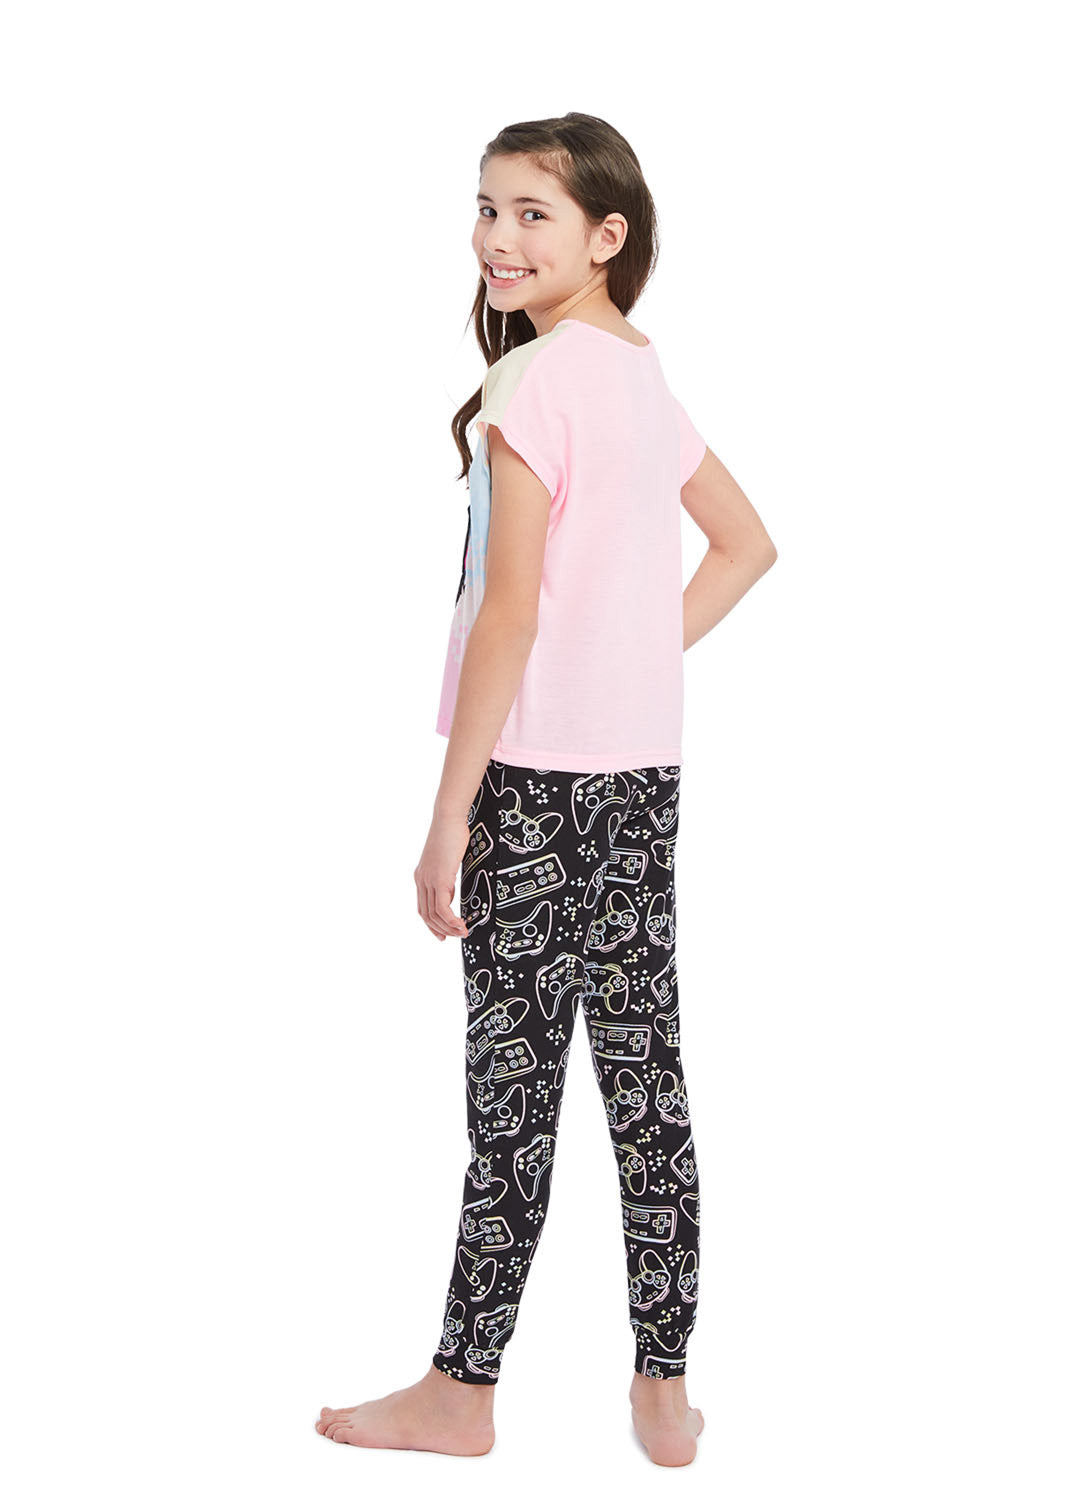 Back view Girl wearing Pj set Gamer, t-shirt (pink) with print and pants (black) with print